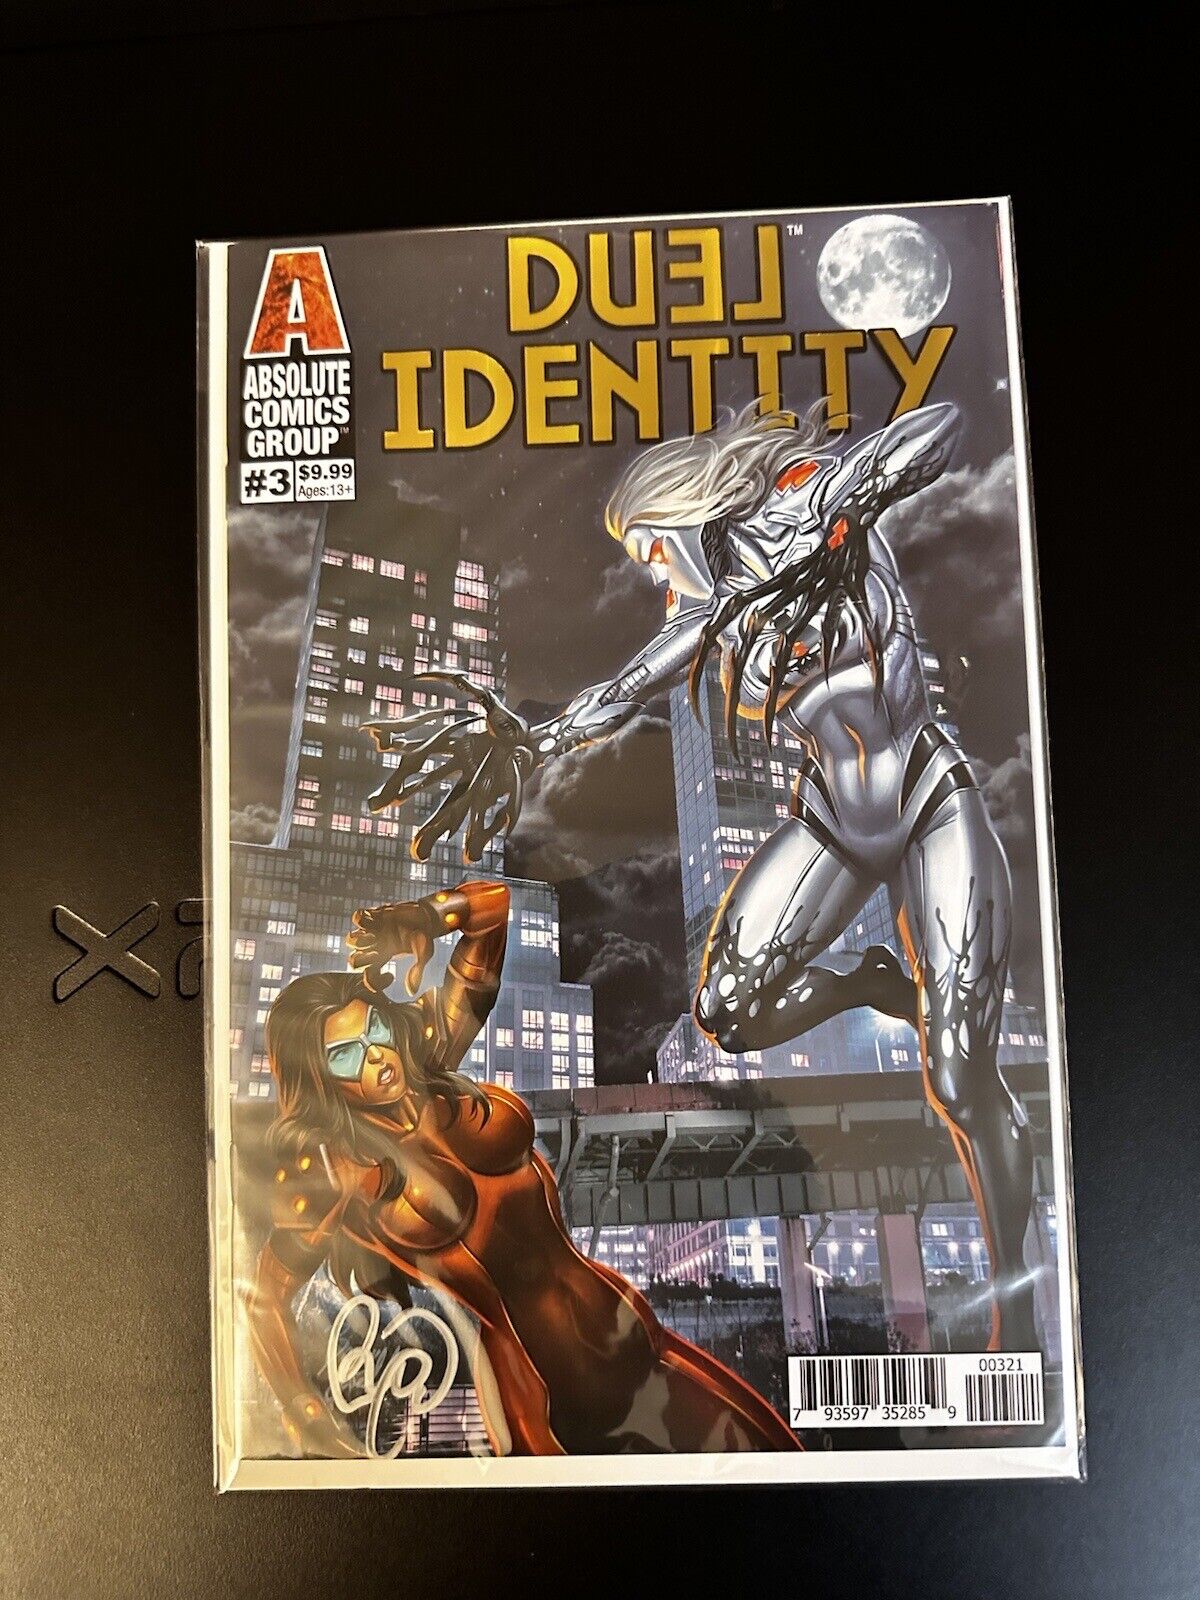 Duel Identity #3 Foil Trade Dress variant signed by Benny Powell w/COA